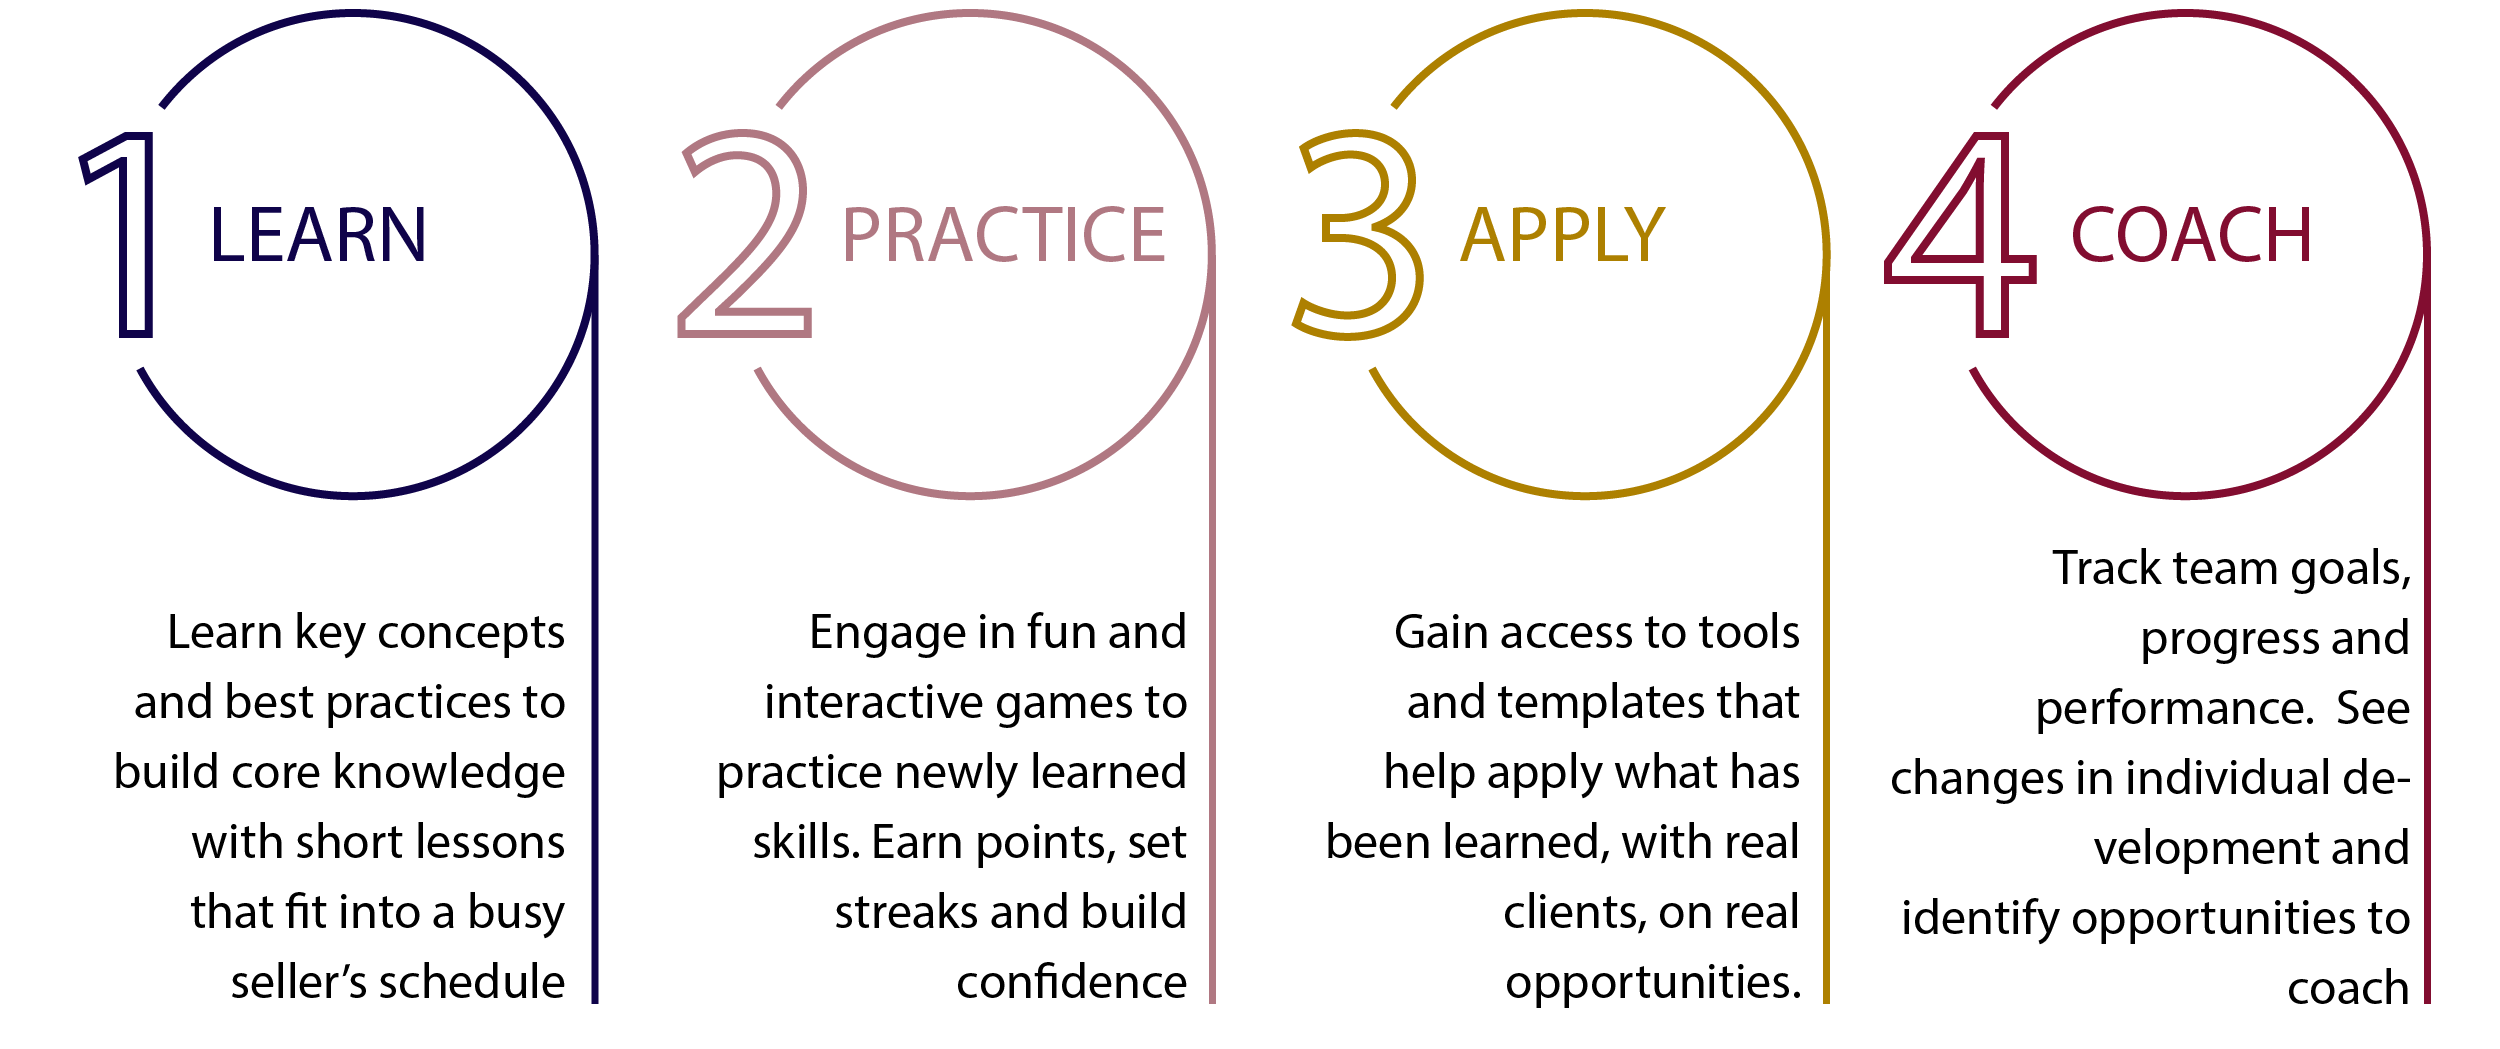 online-training-learn-practice-apply-model.png